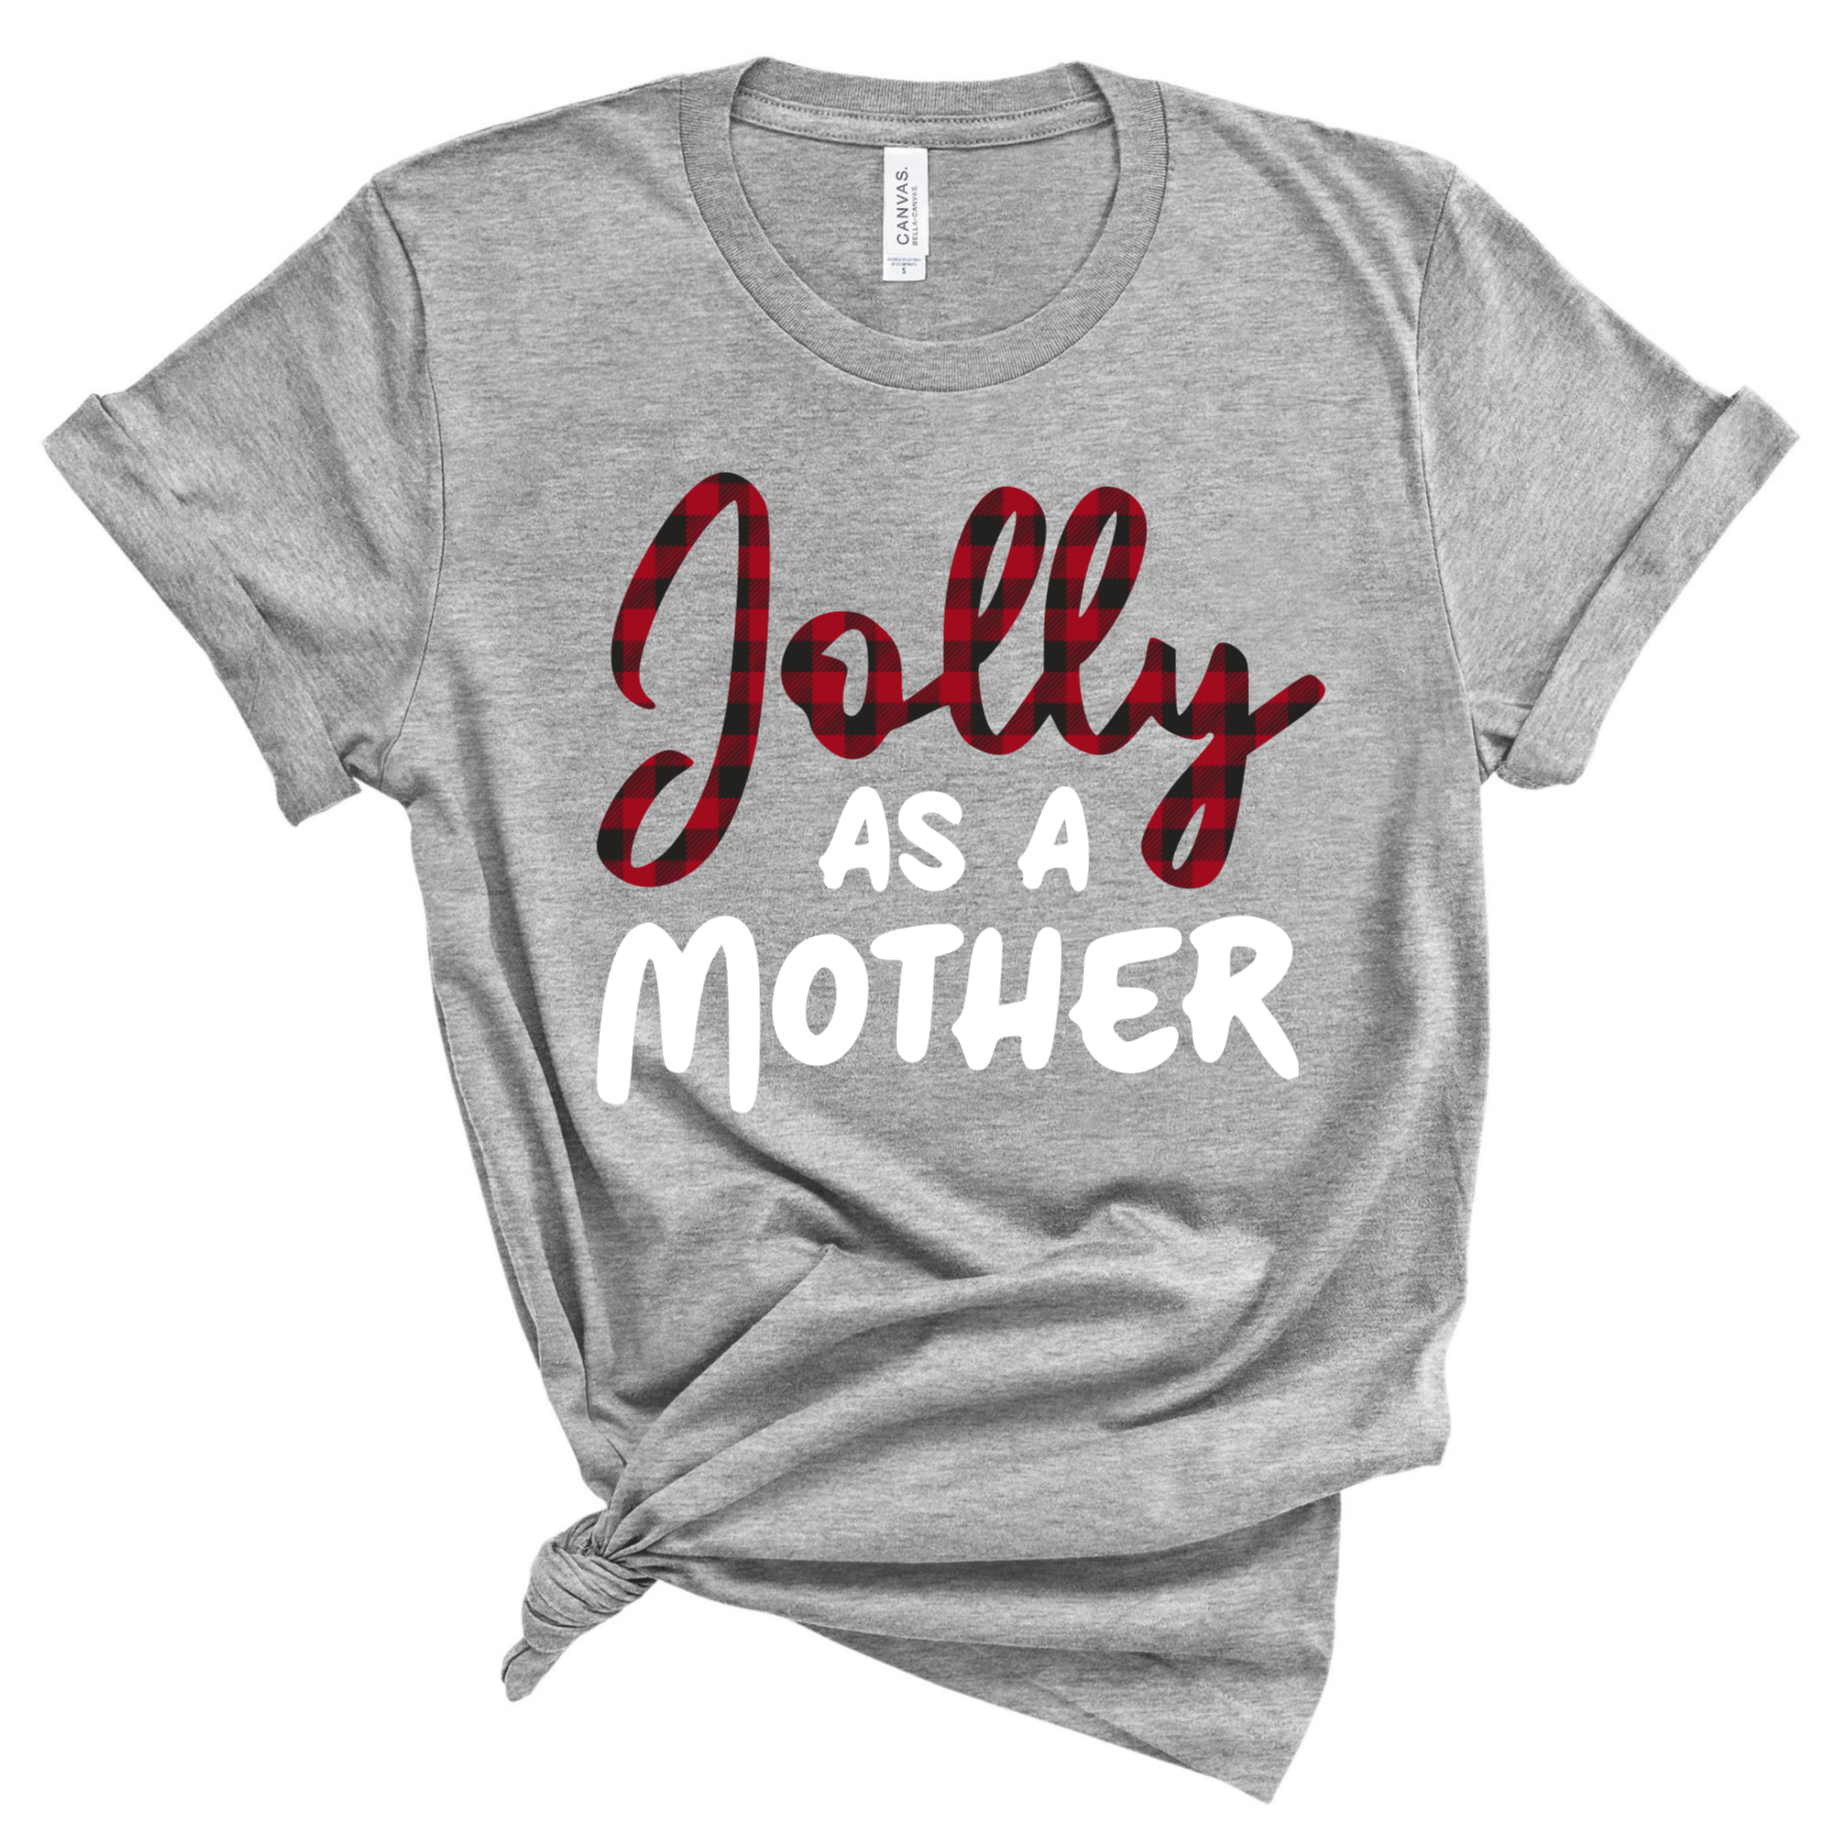 JOLLY AS A MOTHER ADULT SHIRT